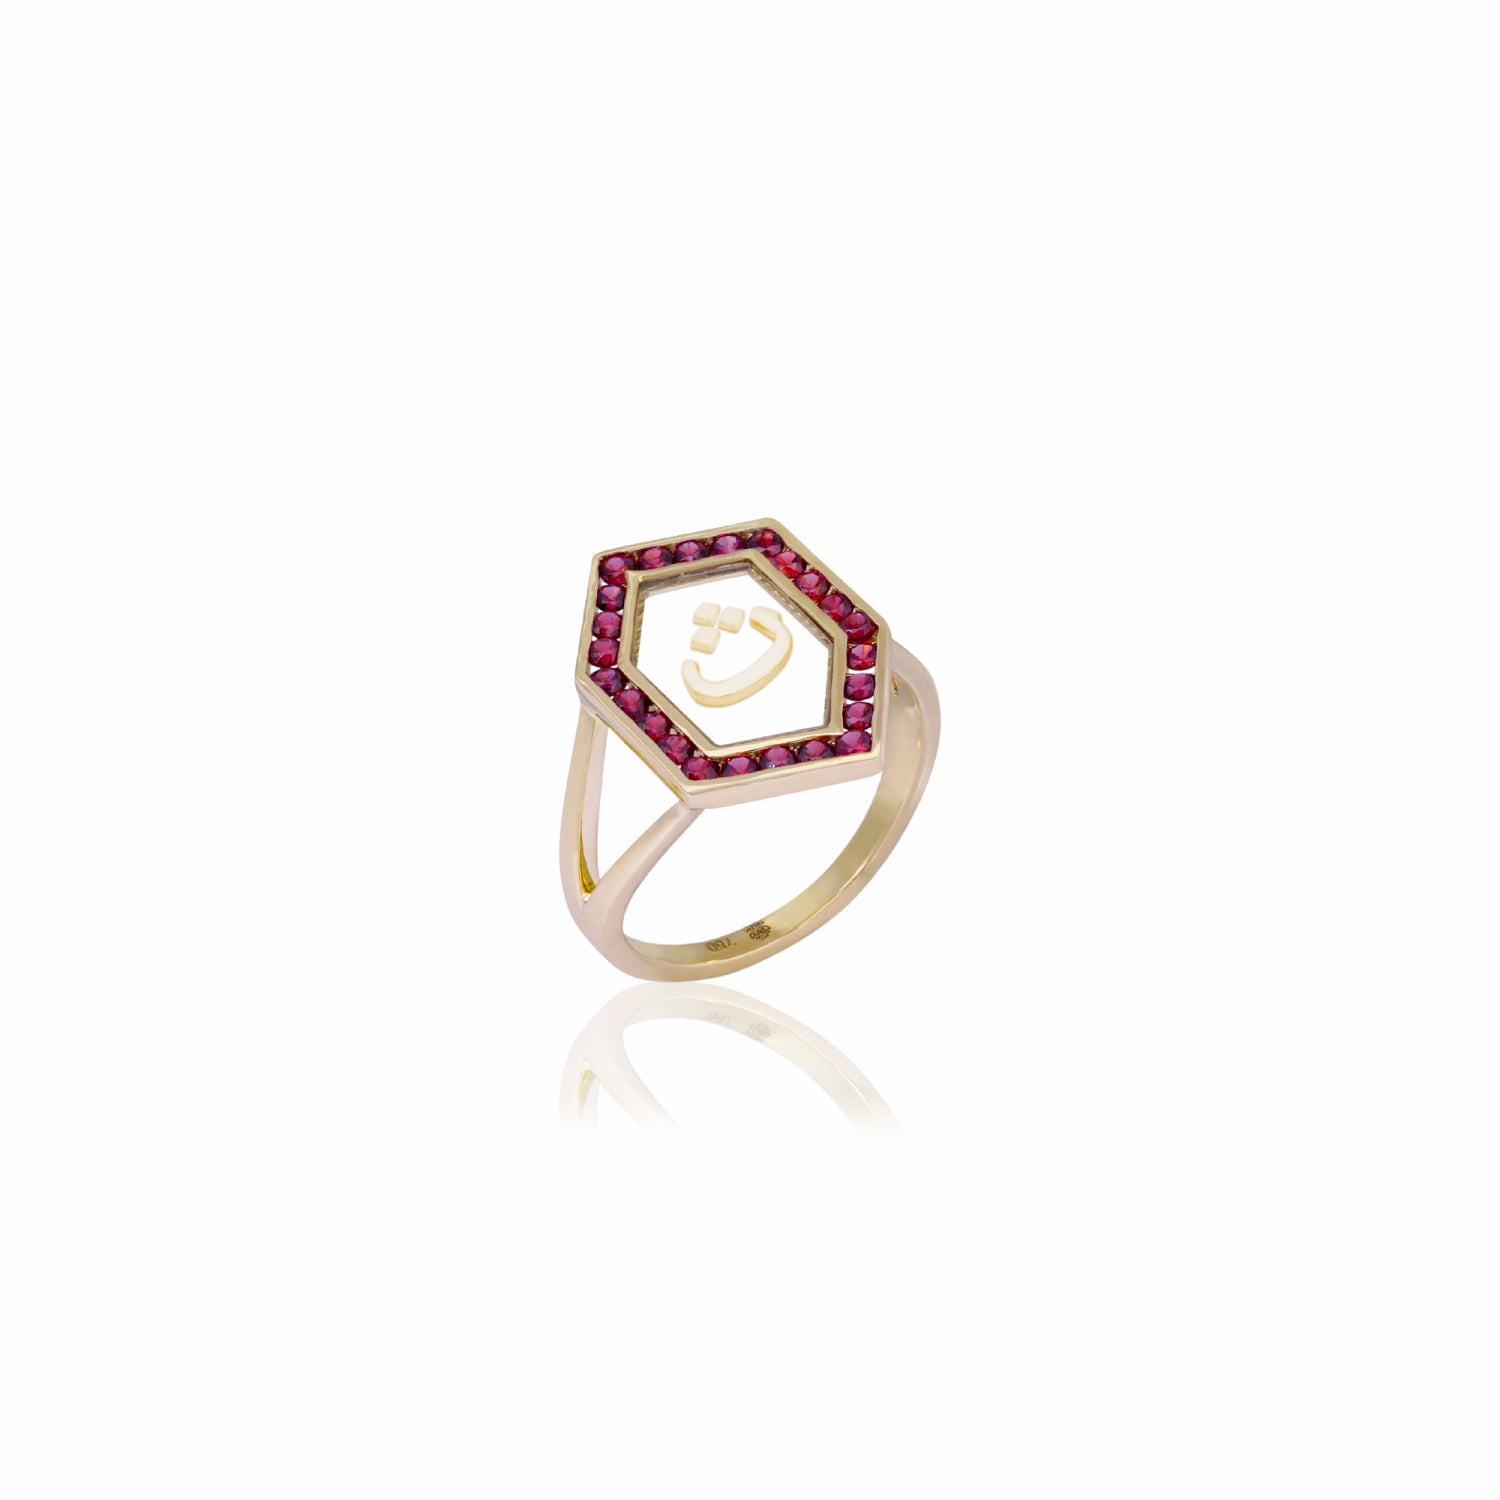 Qamoos 1.0 Letter ث Ruby Ring in Yellow Gold